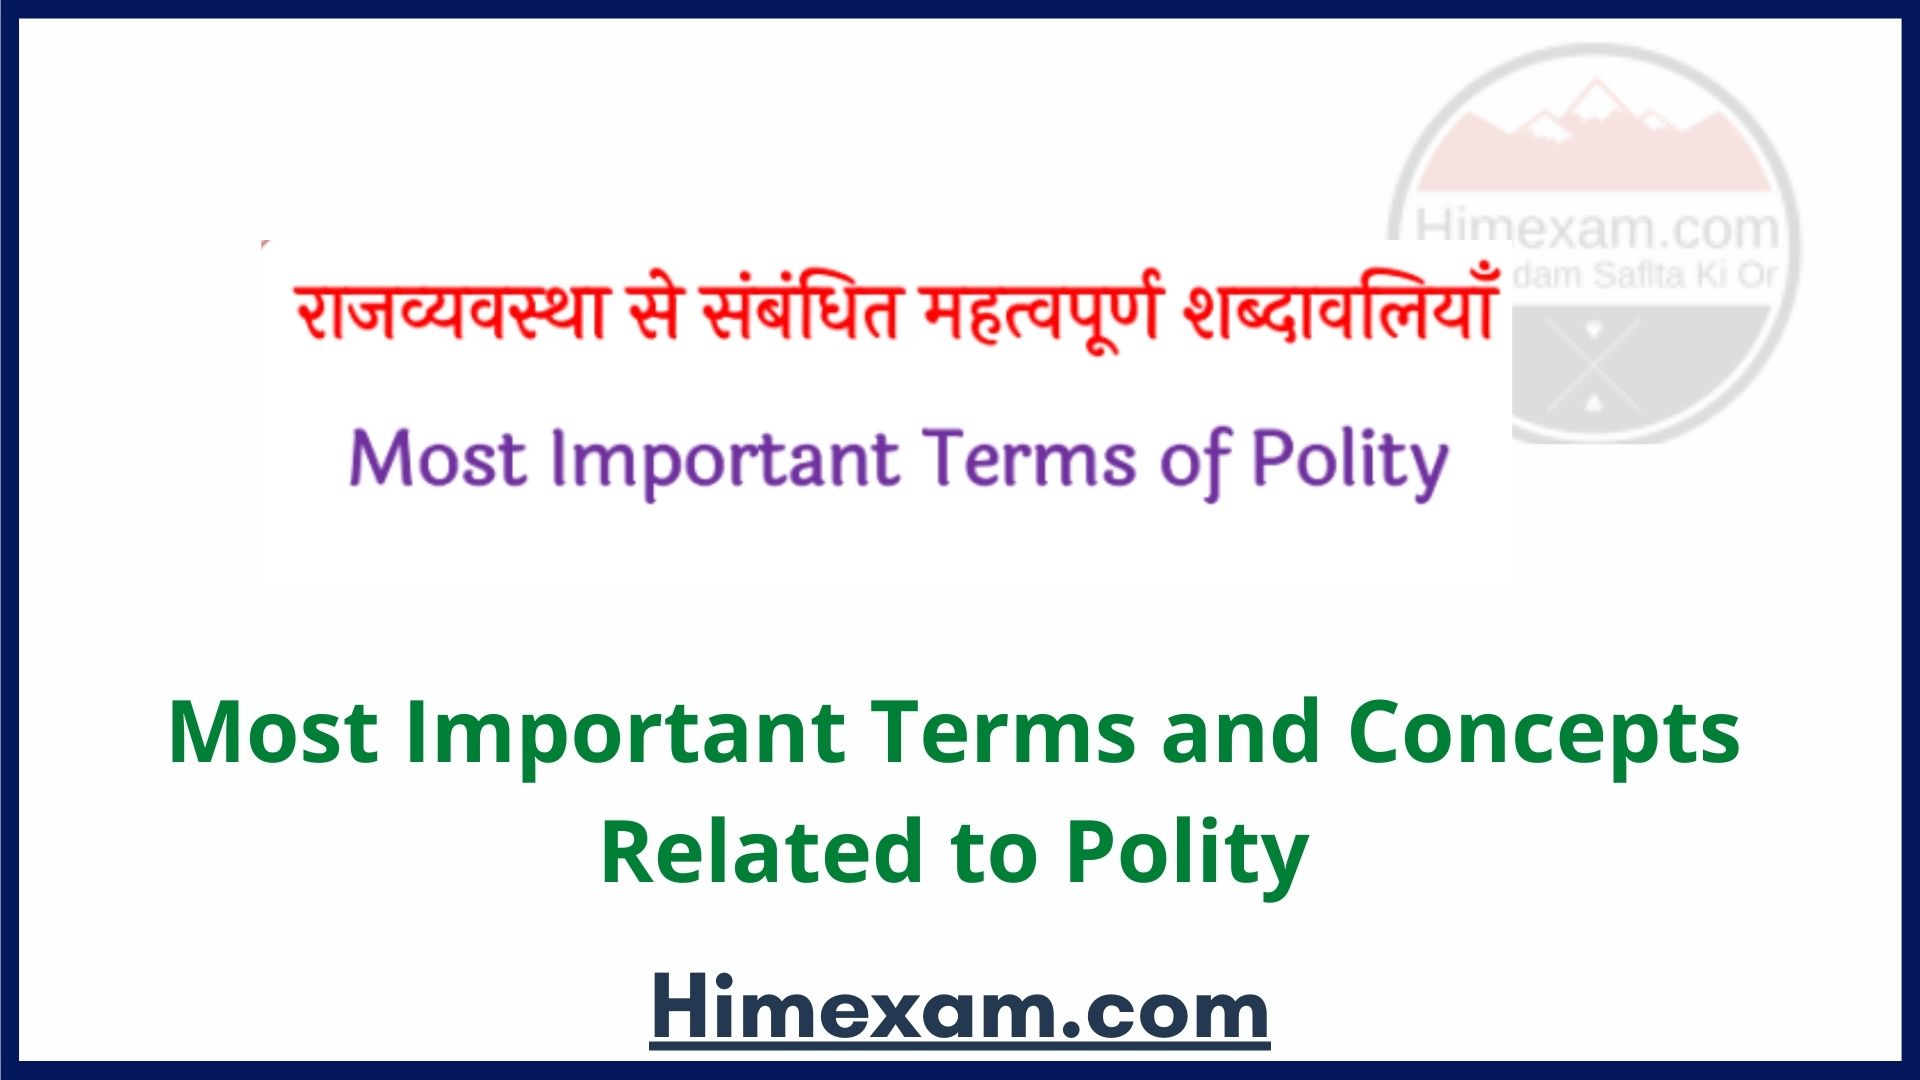 Most Important Terms and Concepts Related to Polity